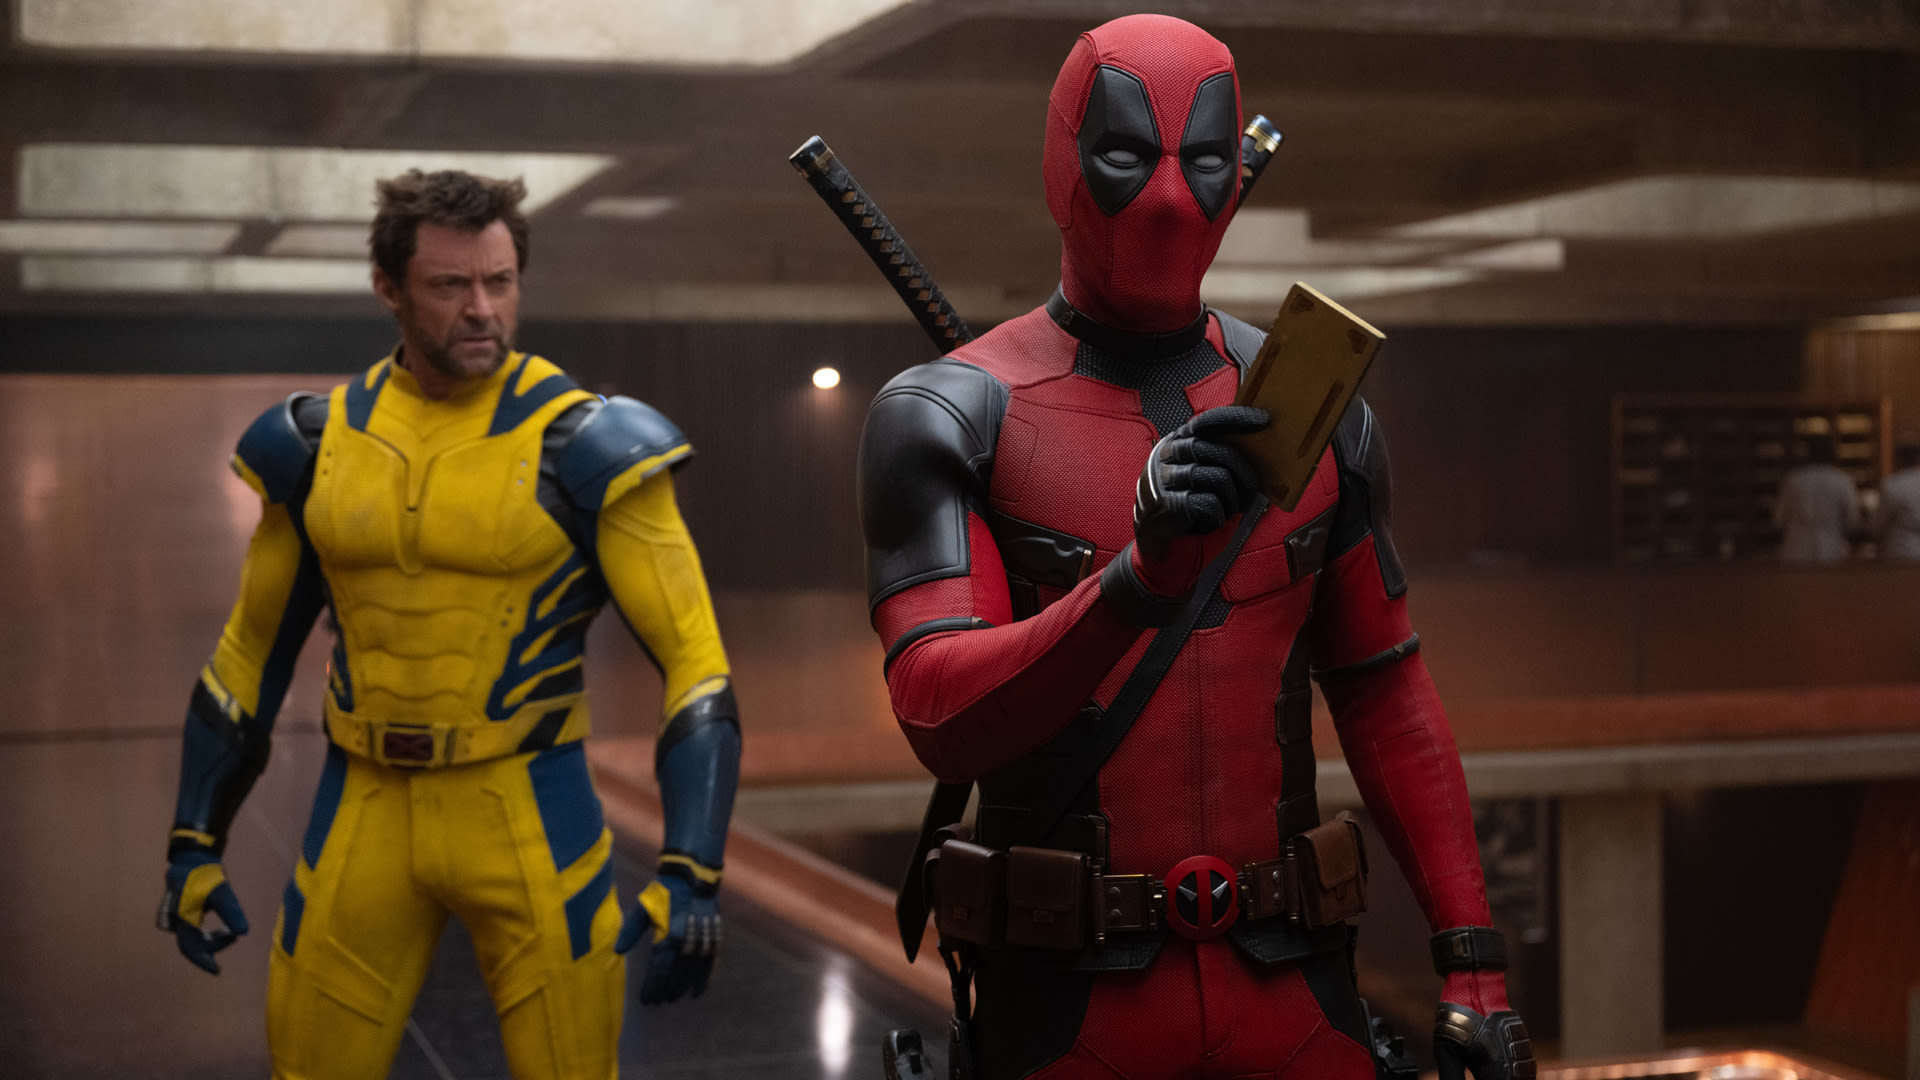 New Deadpool and Wolverine trailer spoils another big Marvel movie cameo – and I want it to stop